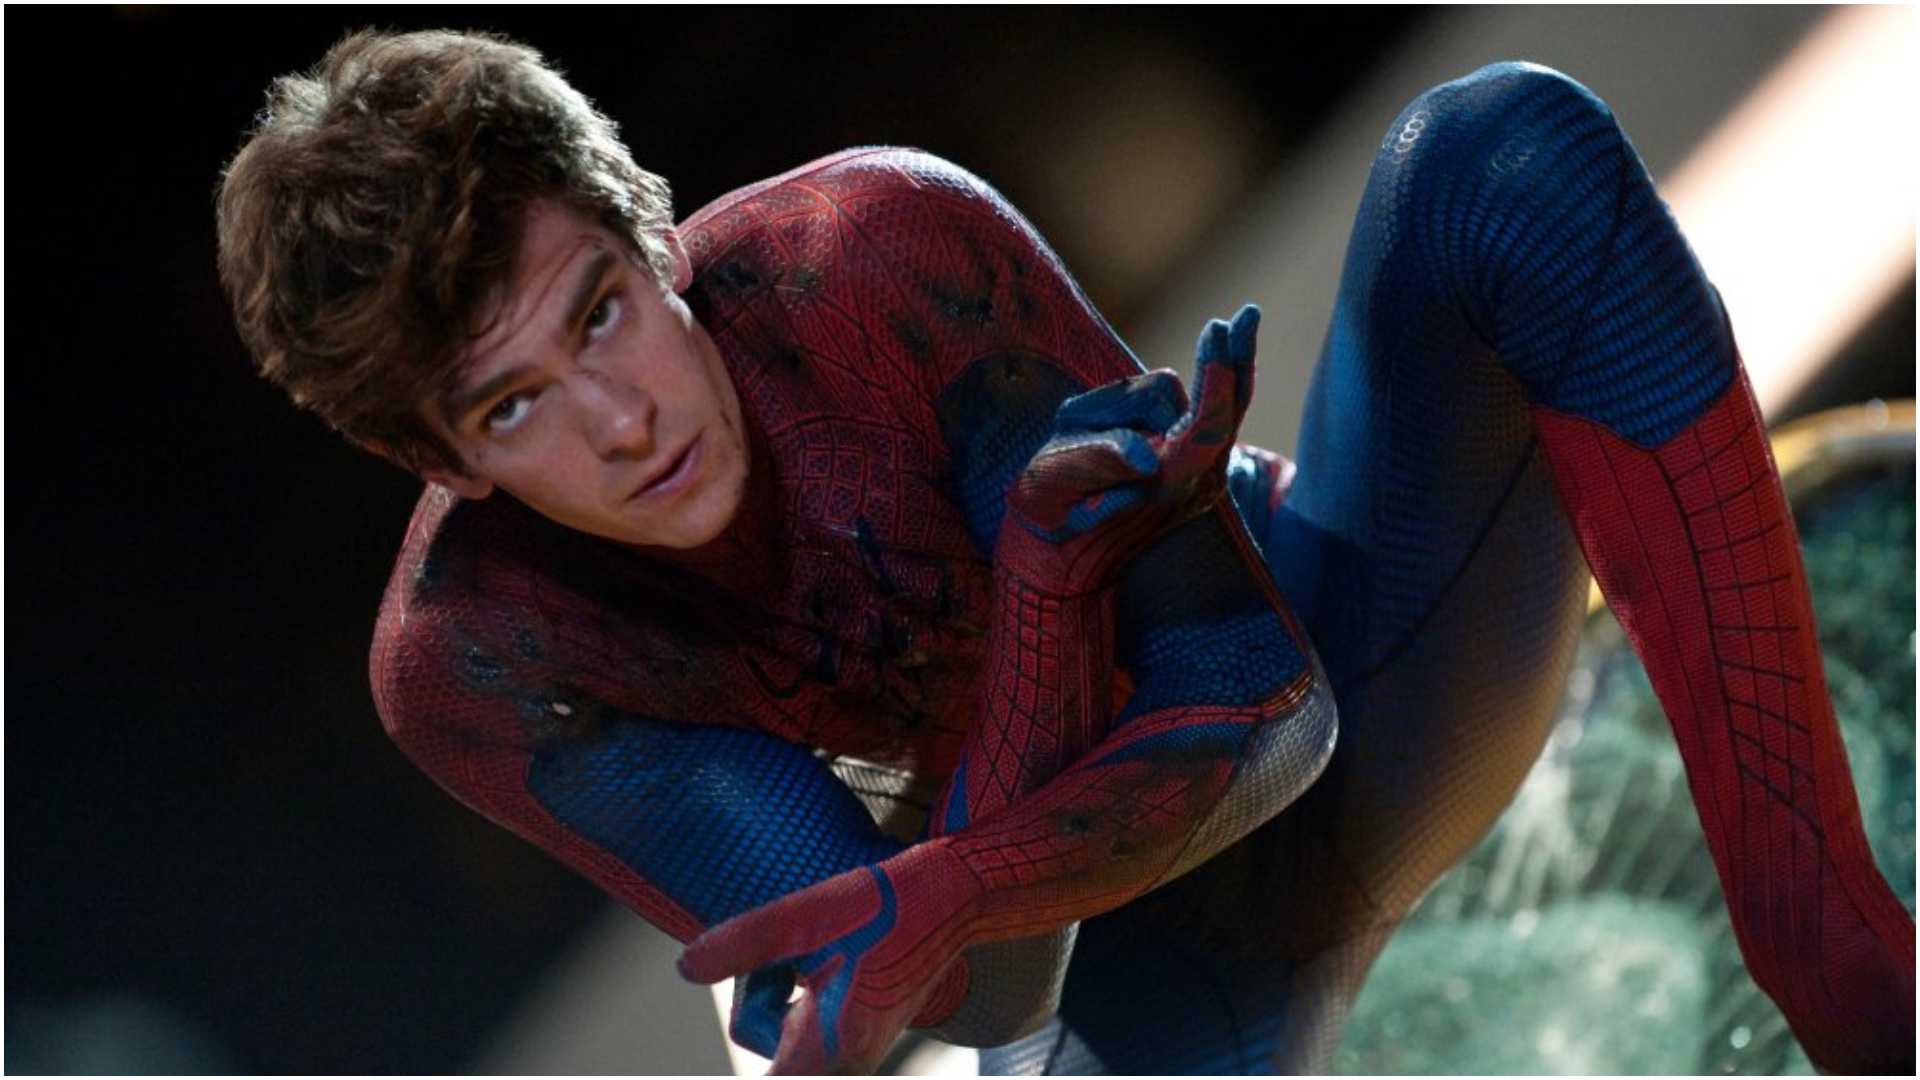 Andrew Garfield and Tobey Maguire's secret Spider-Man screening